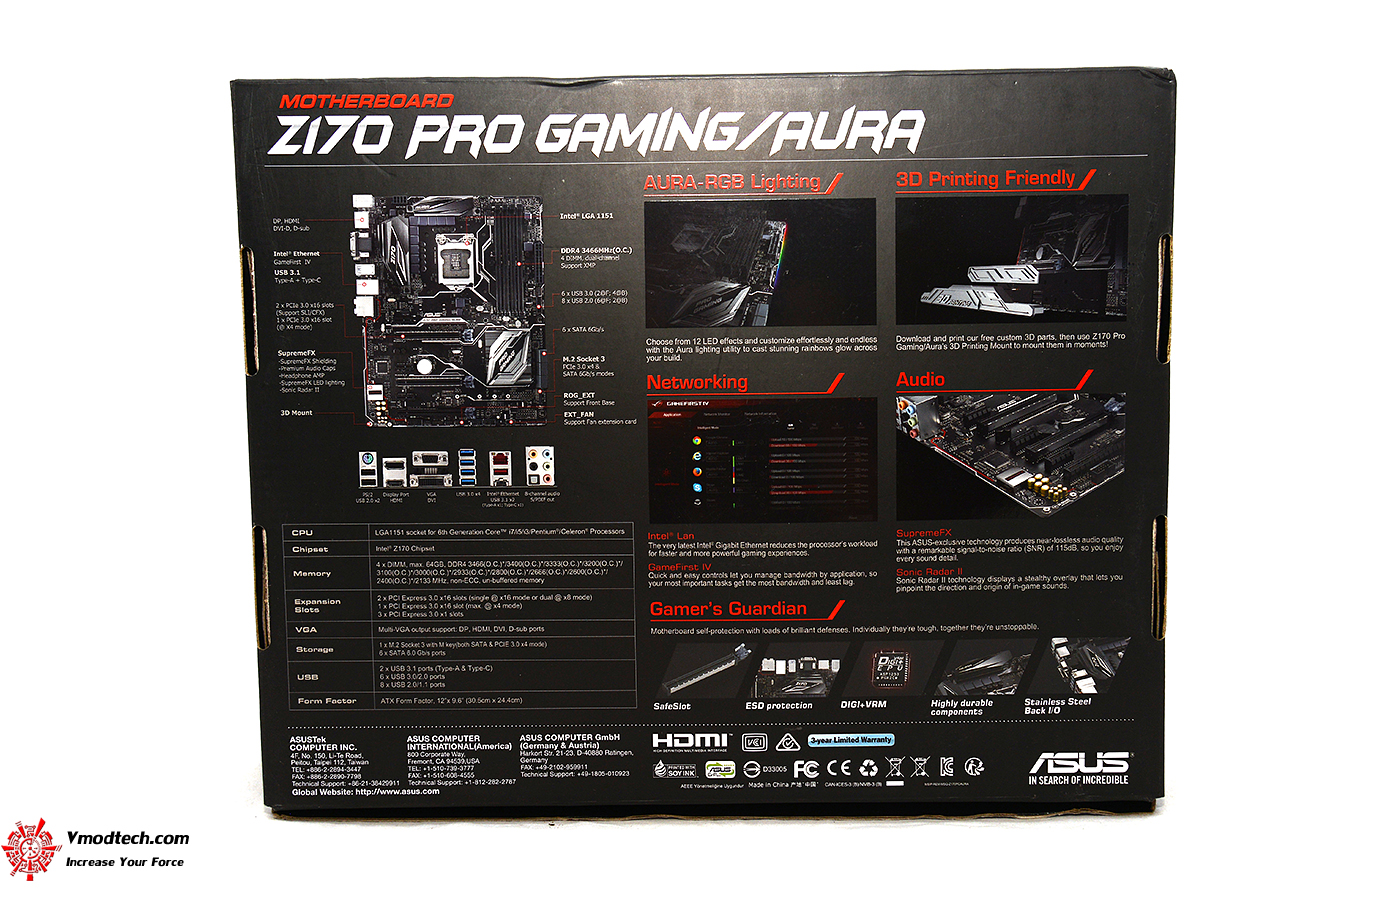 dsc 3901 ASUS Z170 PRO GAMING/AURA REVIEW